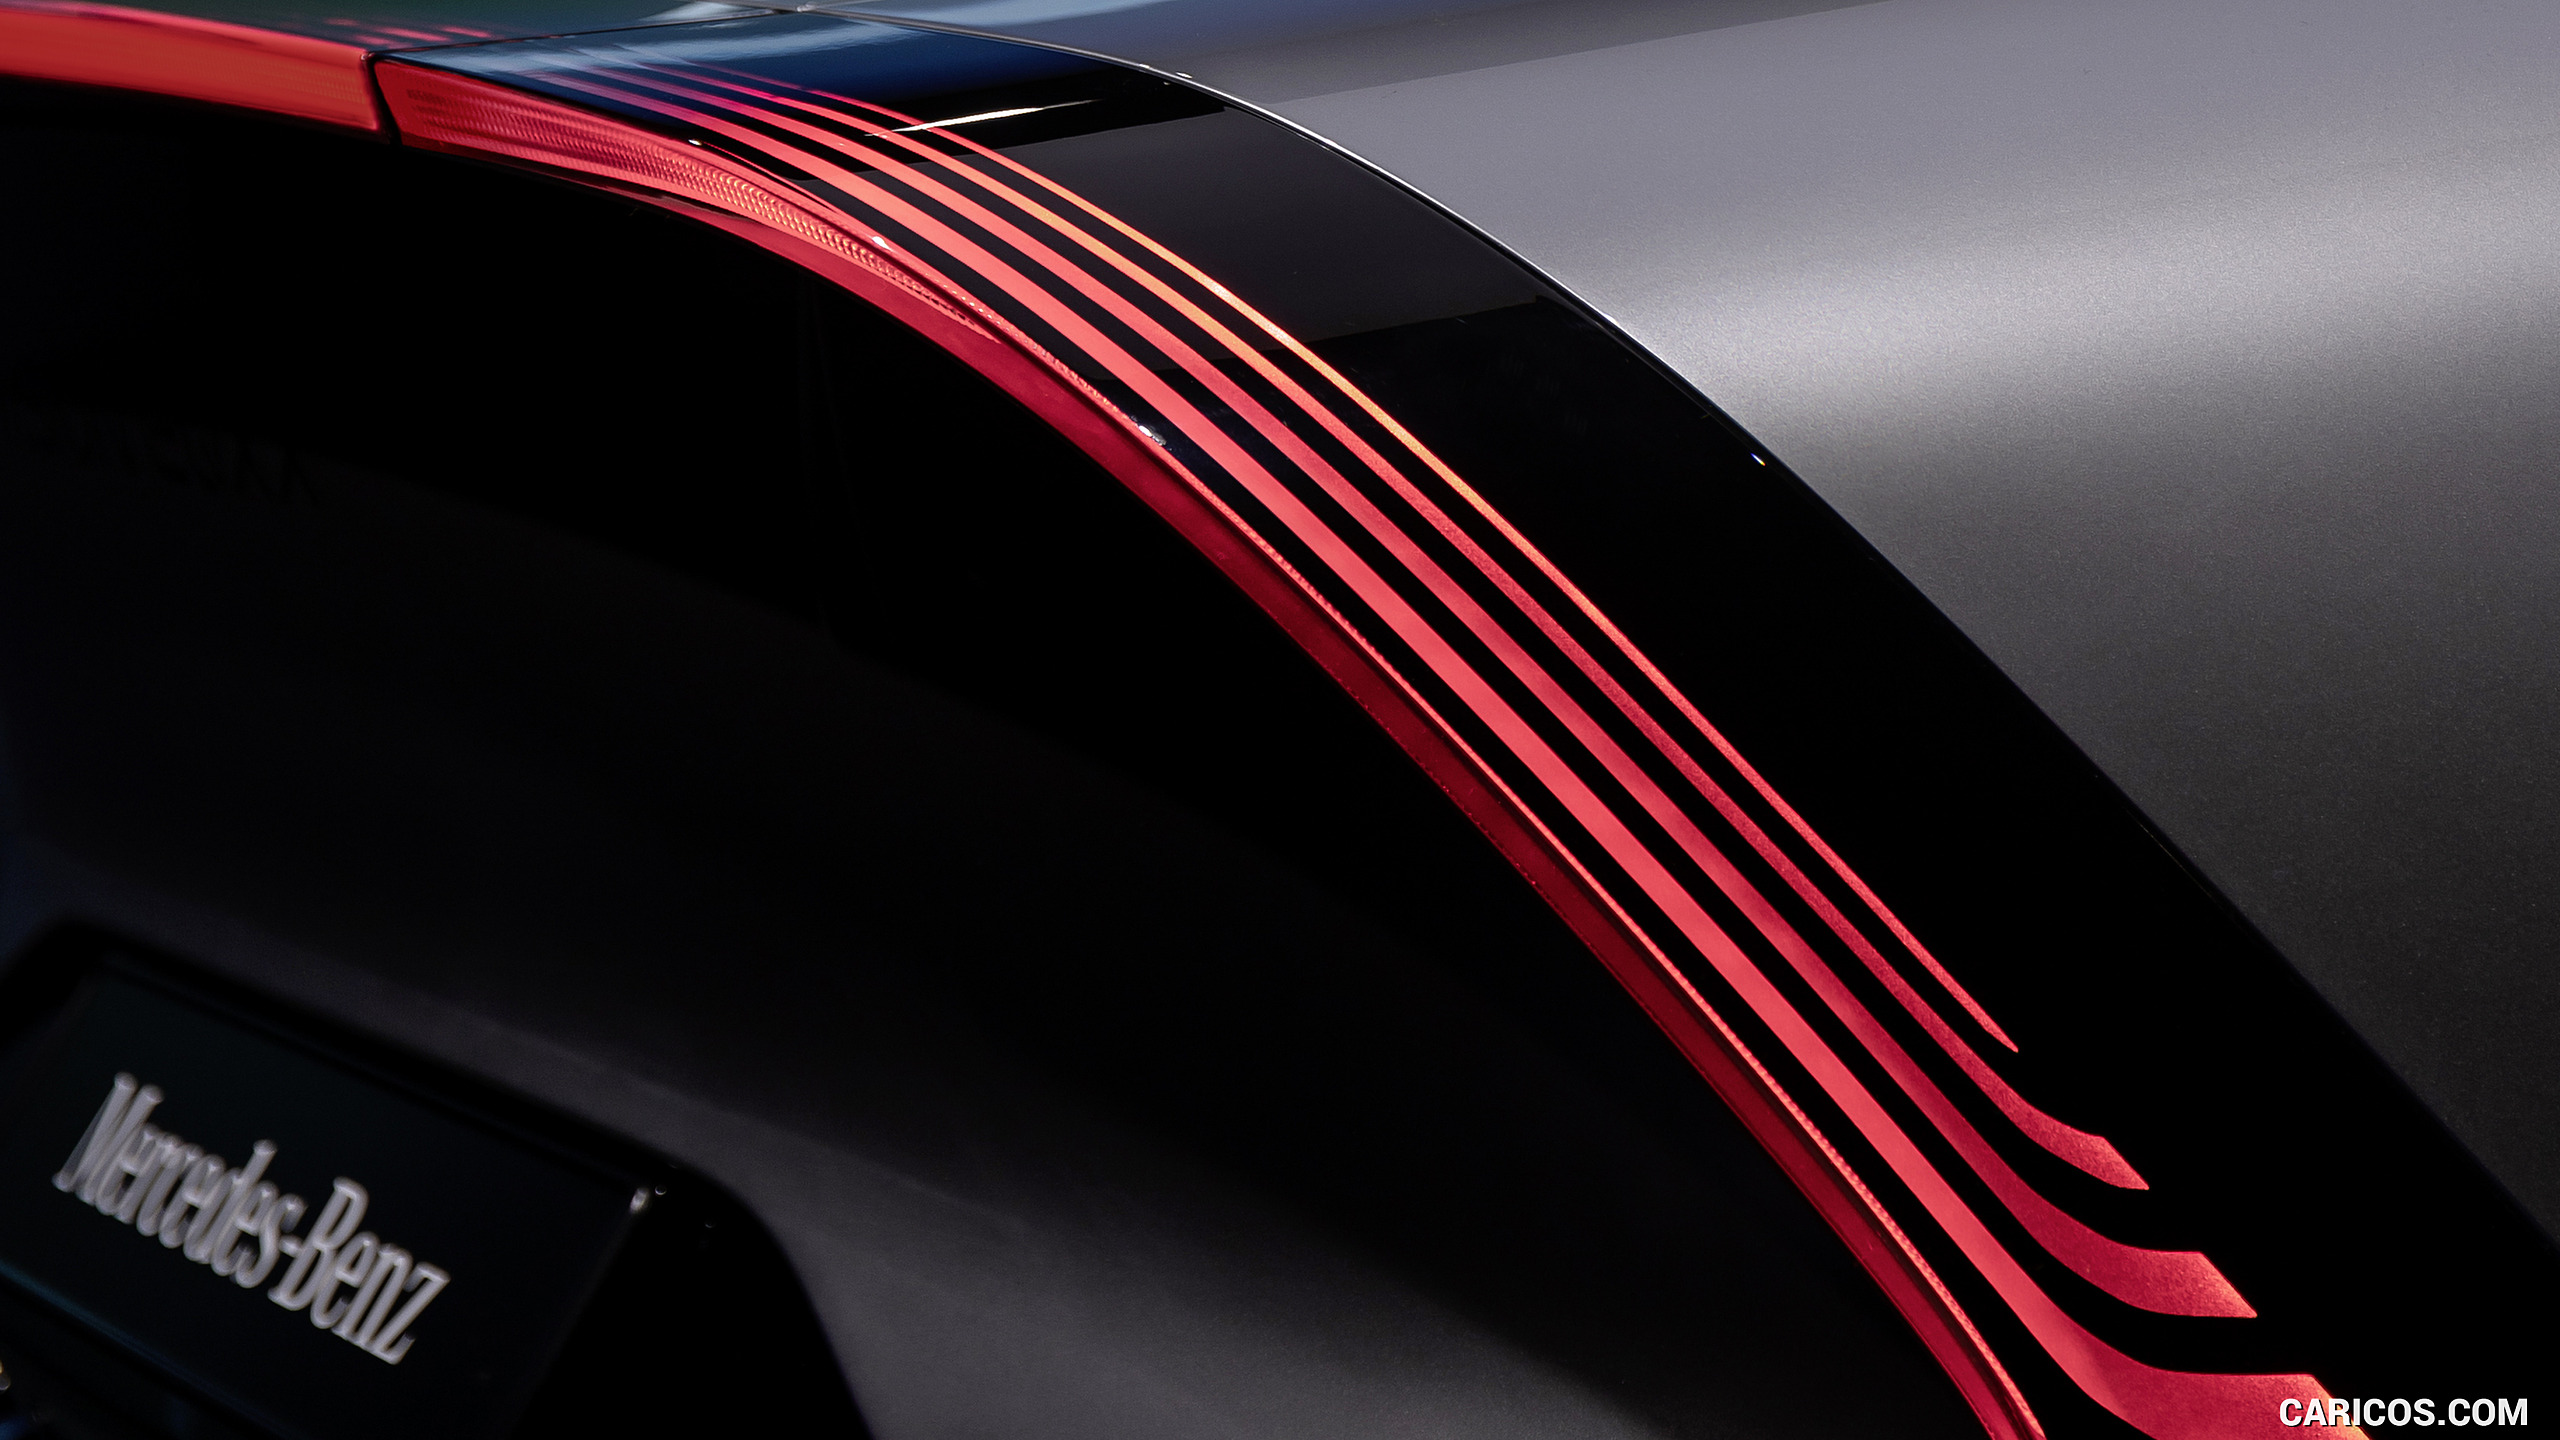 2022 Mercedes-Benz Vision EQXX - Tail Light, #28 of 146